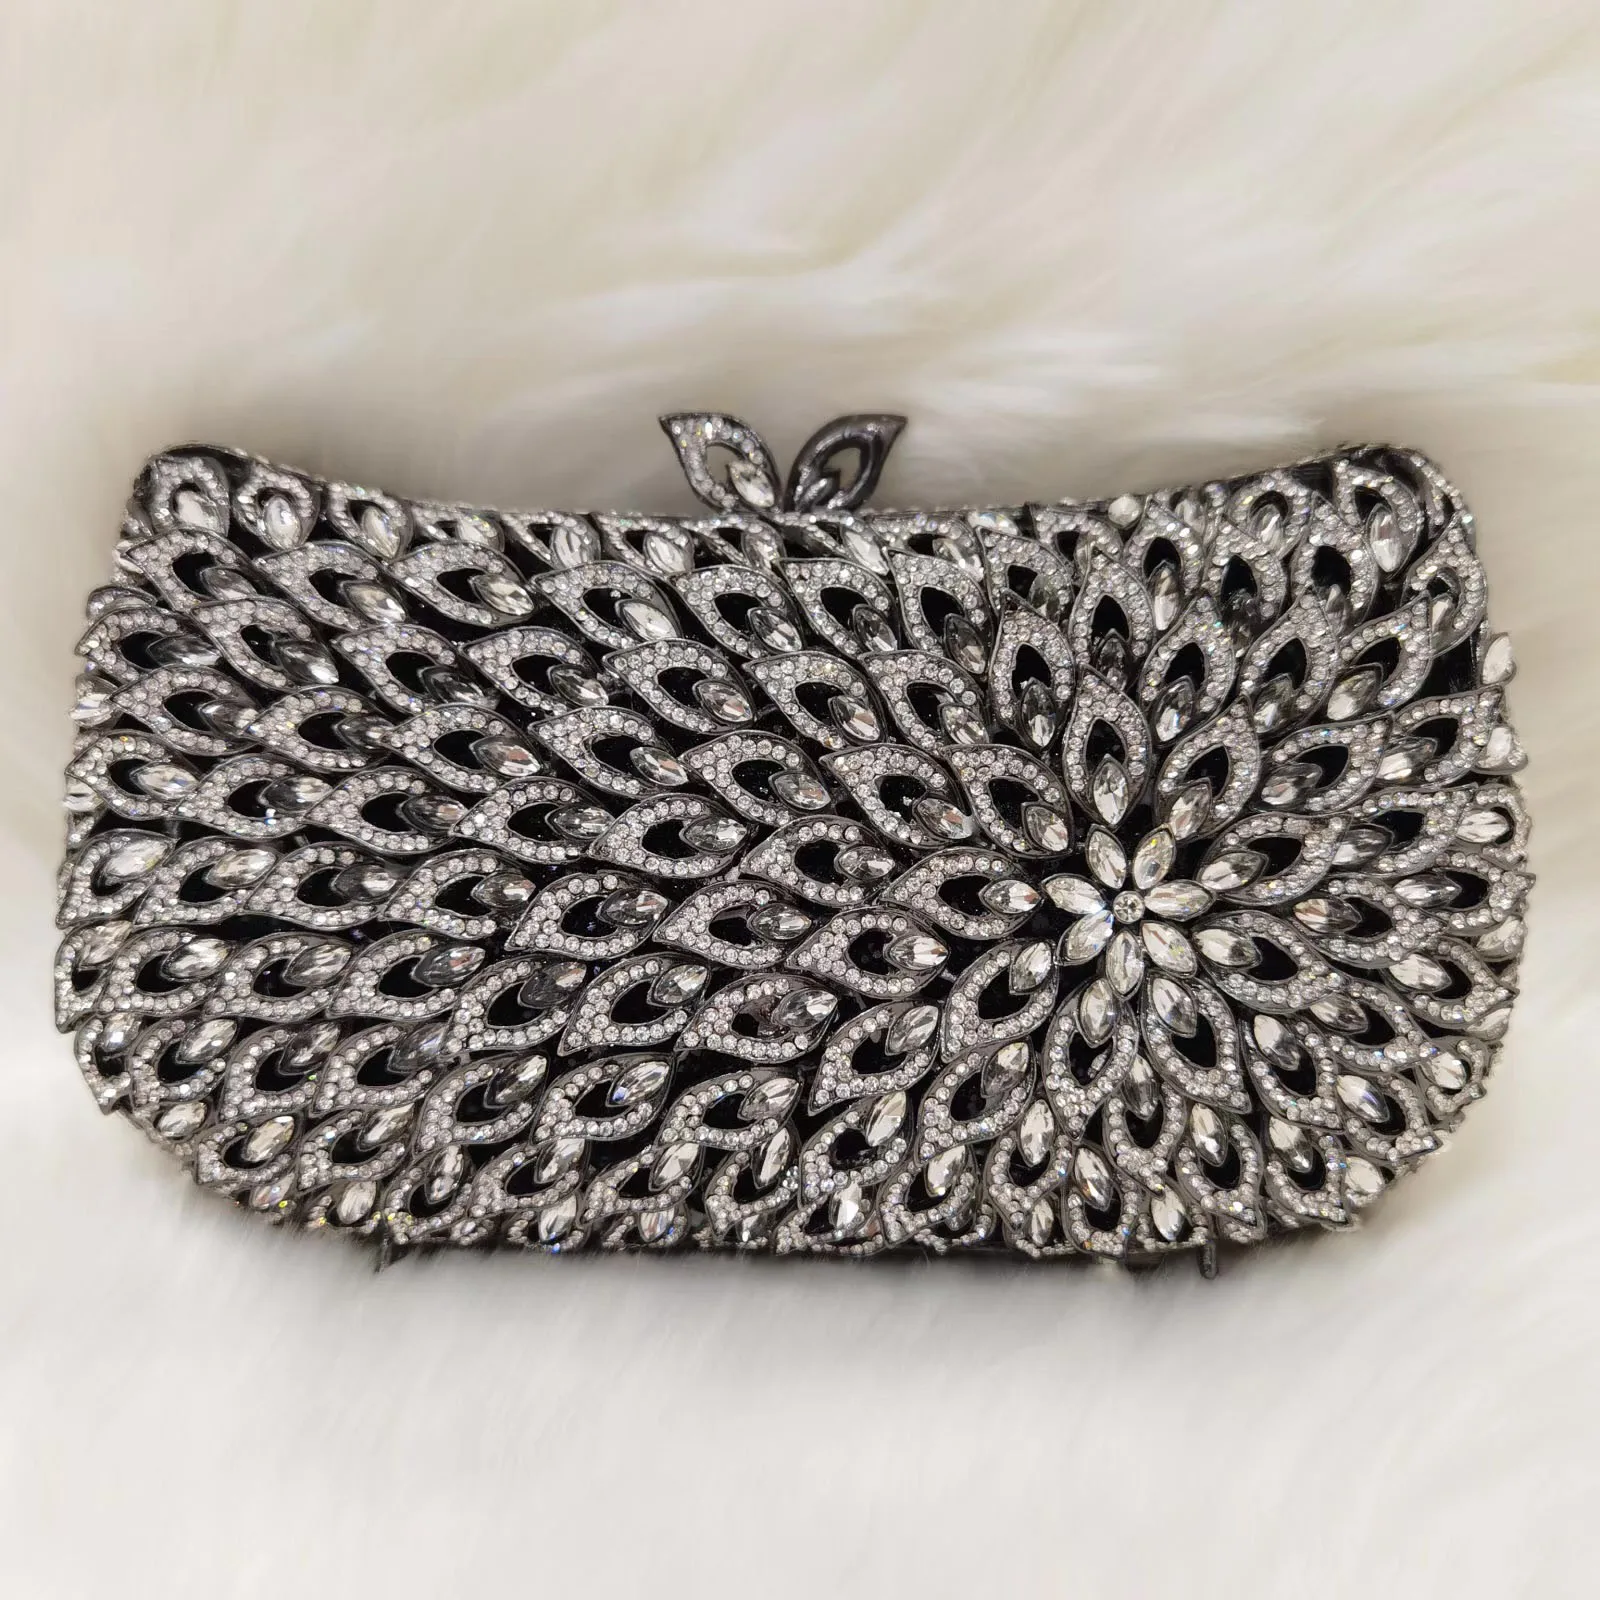 Luxy Moon Pearl Clutch Purse Luxury Handbag Embroidery Evening Bag - Luxy  Moon - Evening Purses and Leather Bags for Women